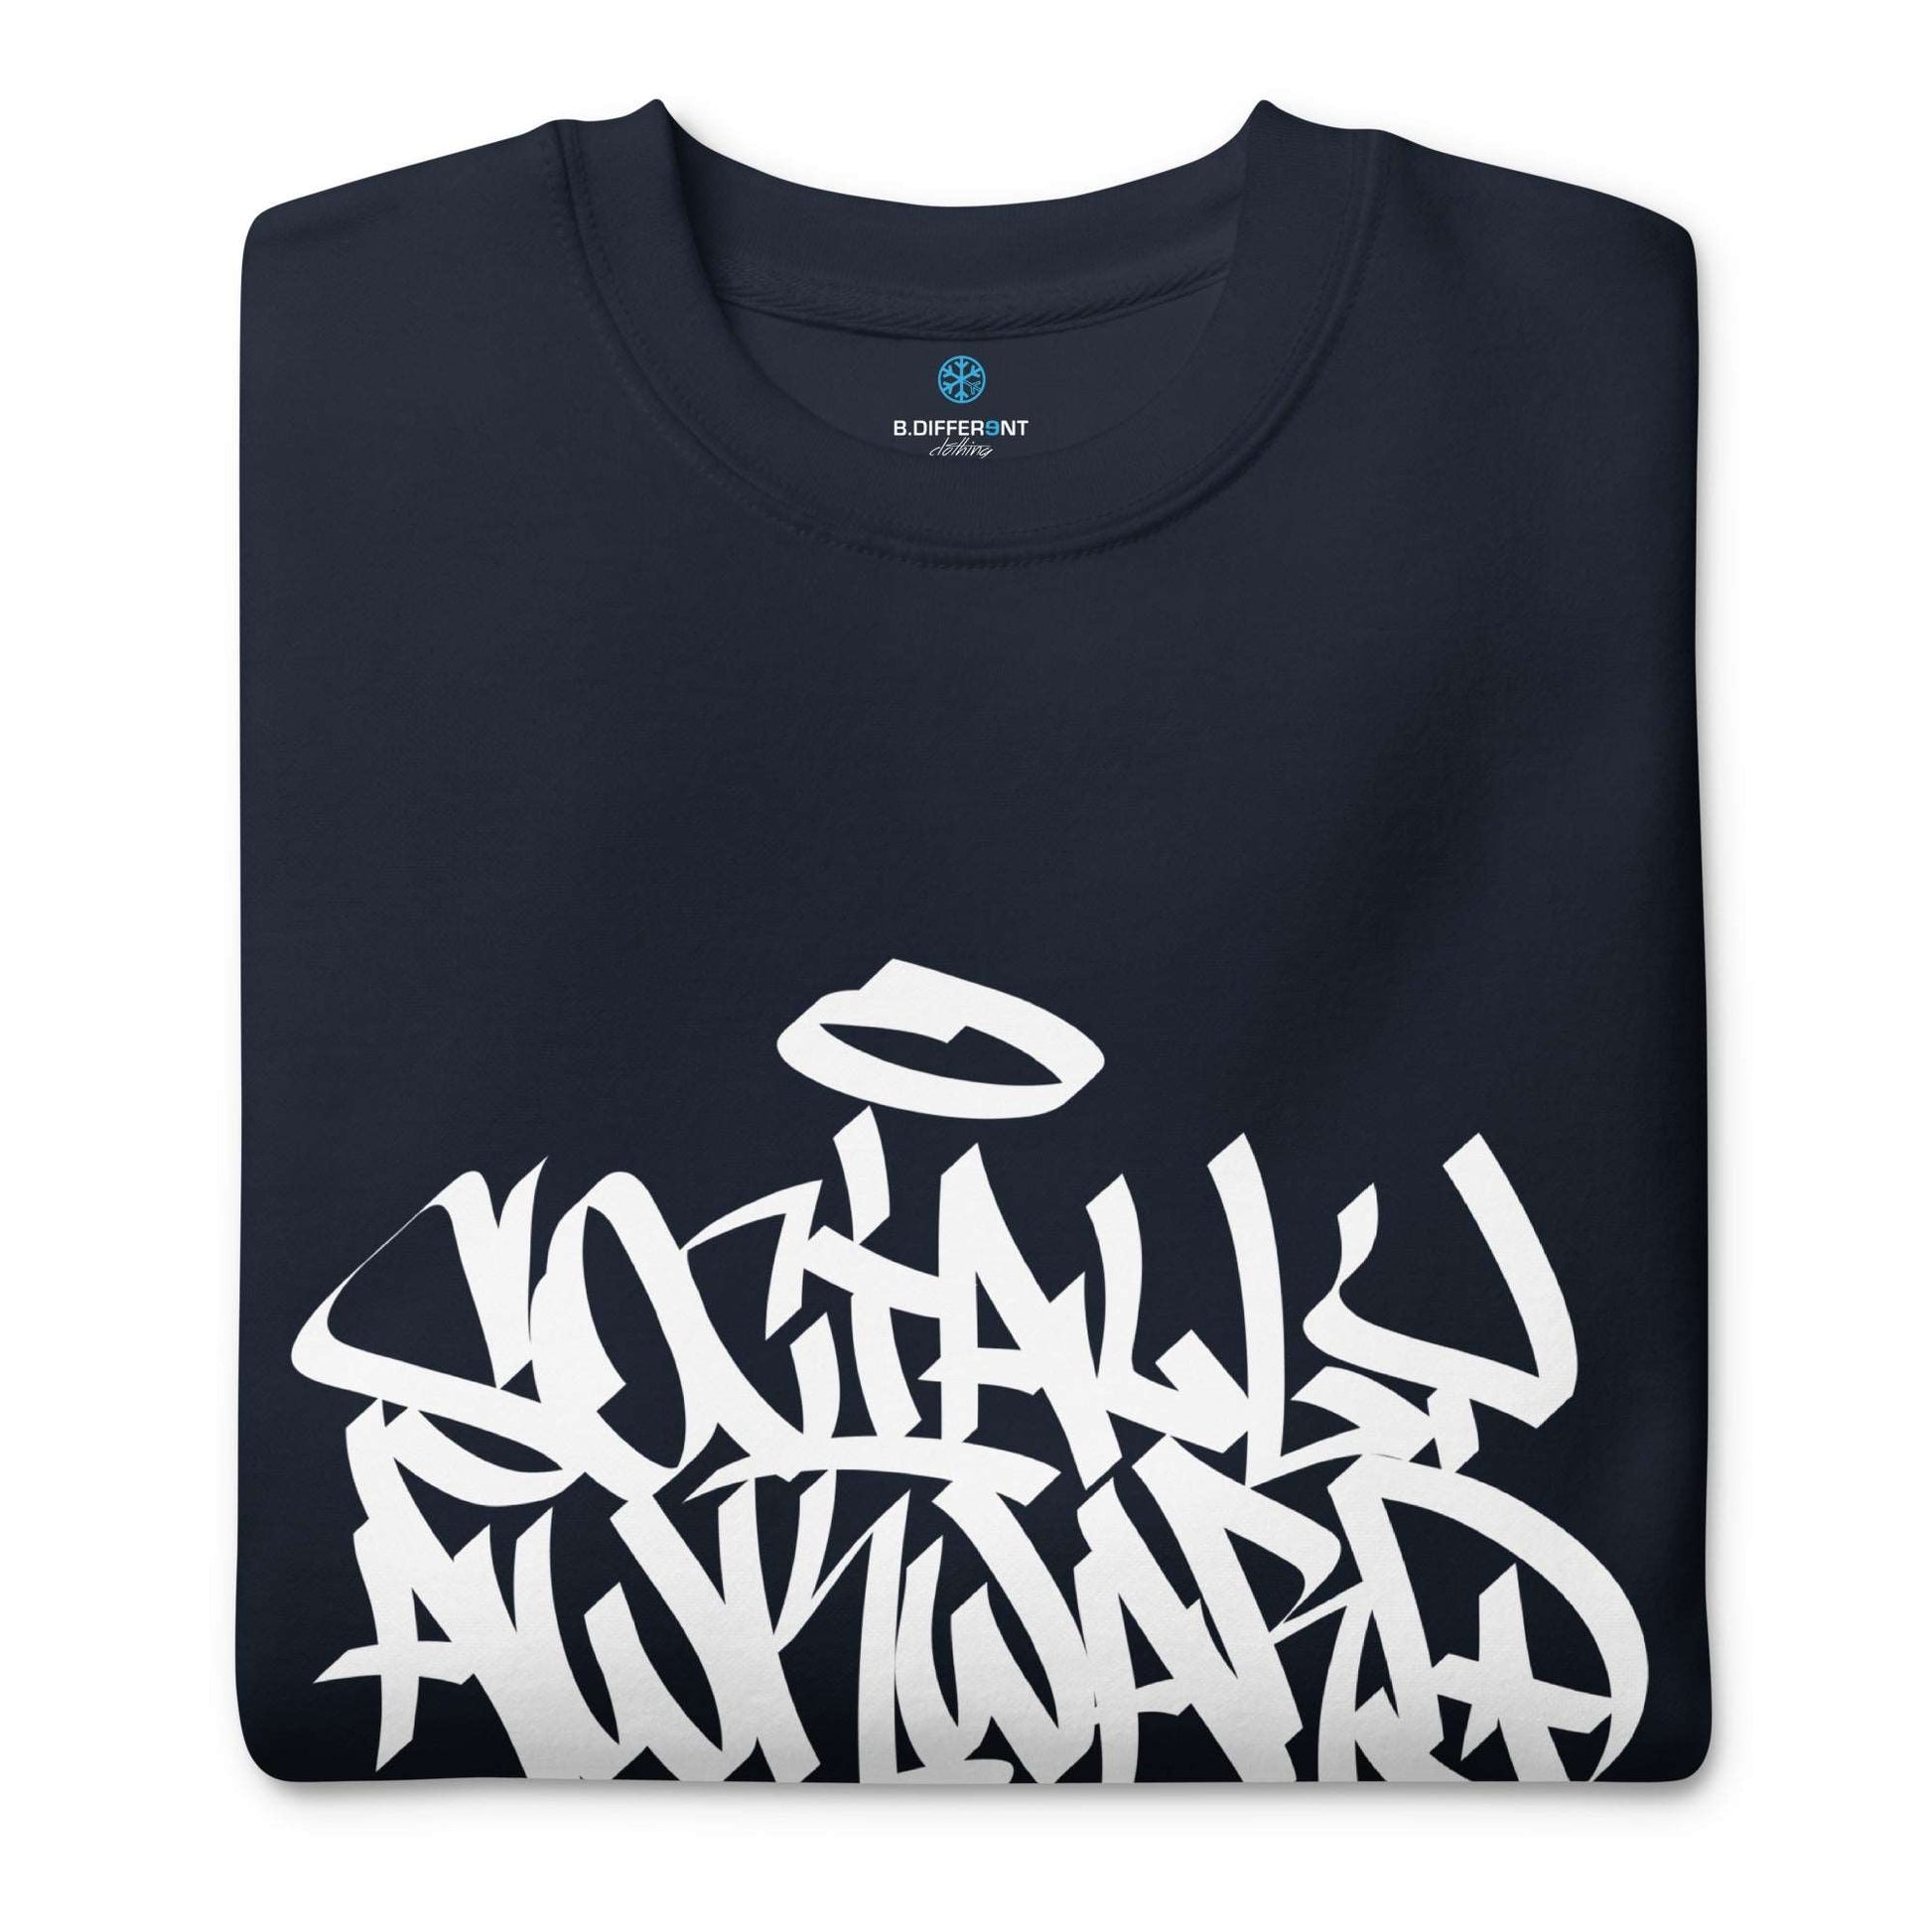 folded sweatshirt Socially Awkward navy by B.Different Clothing independent streetwear brand inspired by street art graffiti